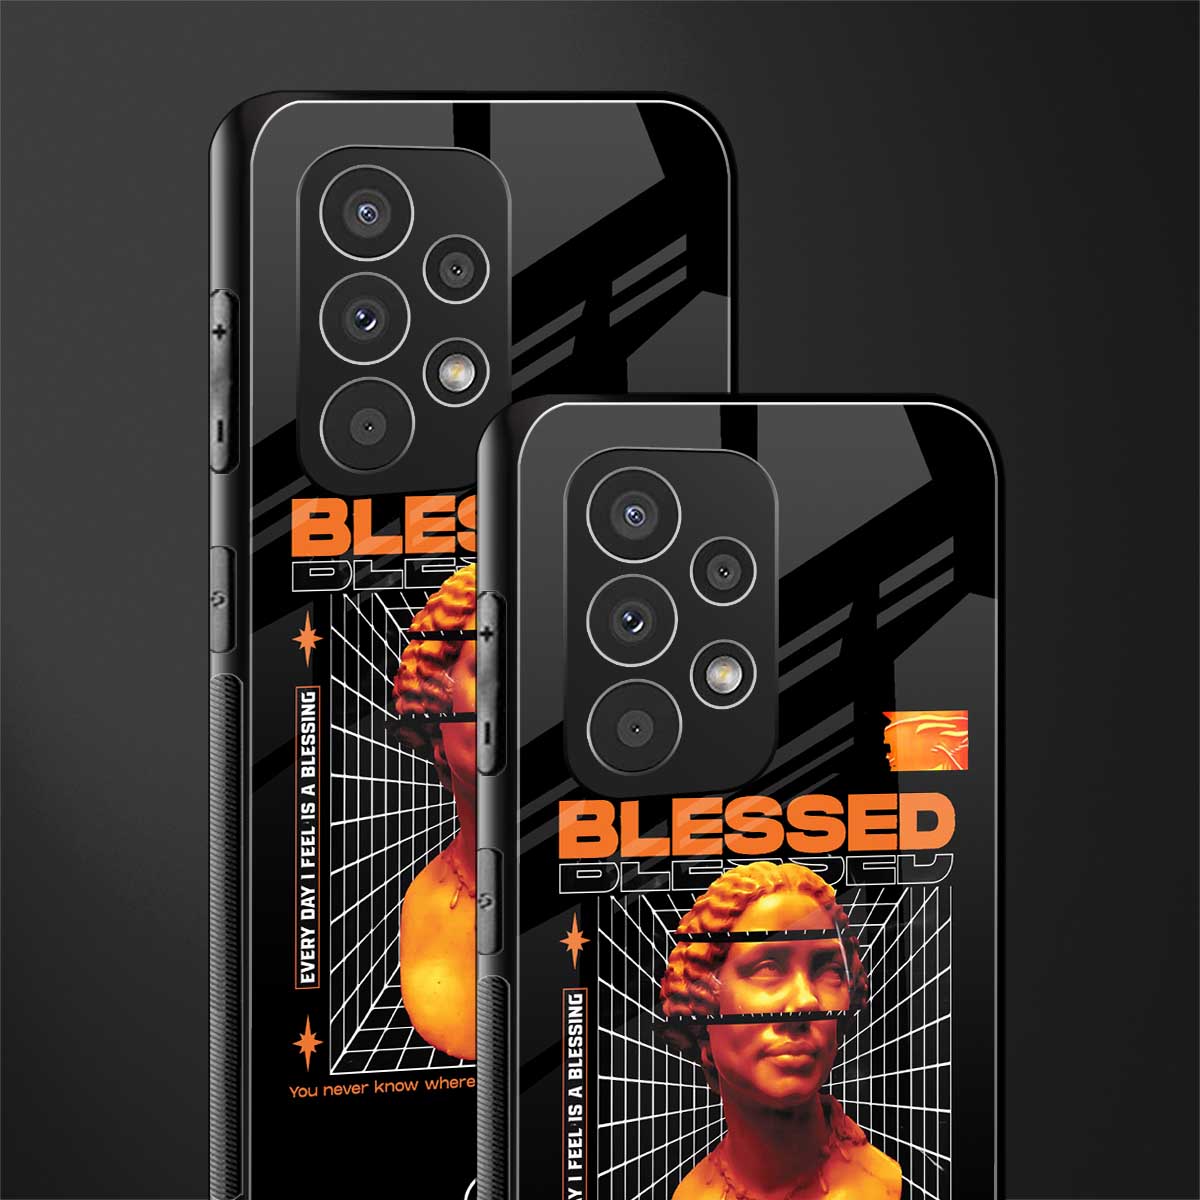 blessing back phone cover | glass case for samsung galaxy a73 5g